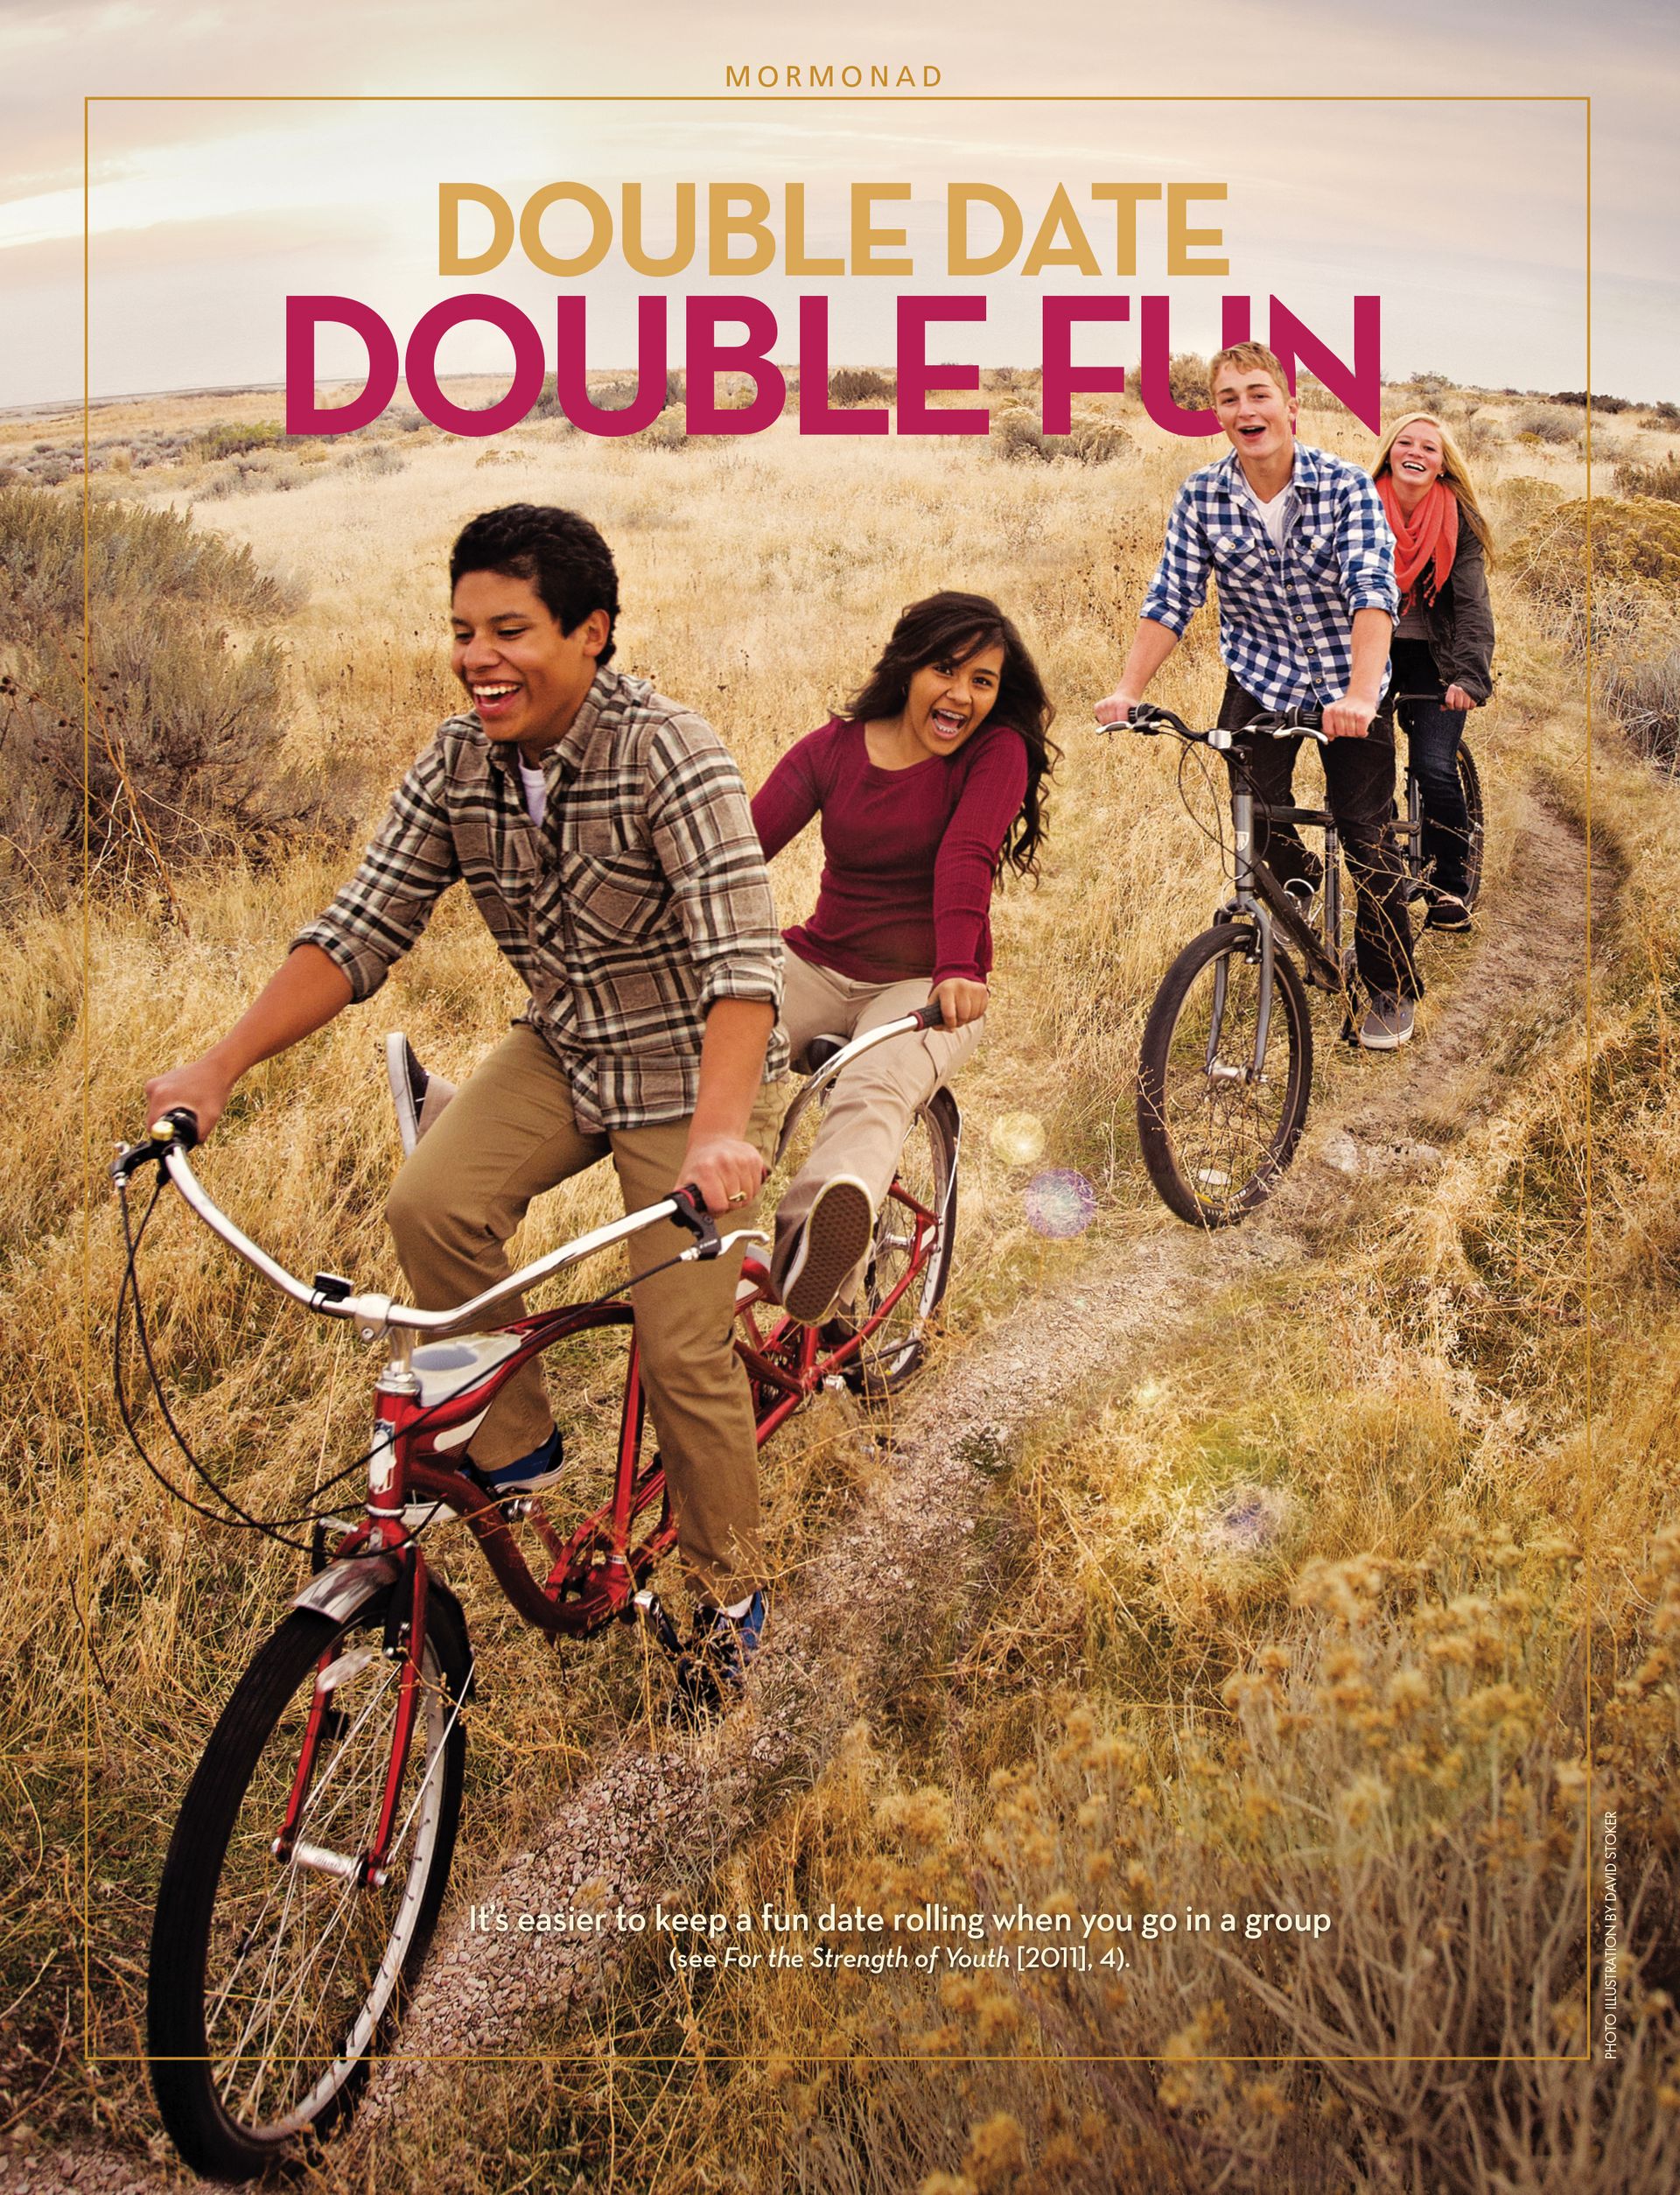 Double Date, Double Fun. It’s easier to keep a fun date rolling when you go in a group (see For the Strength of Youth [2011] 4). Feb. 2012 © undefined ipCode 1.